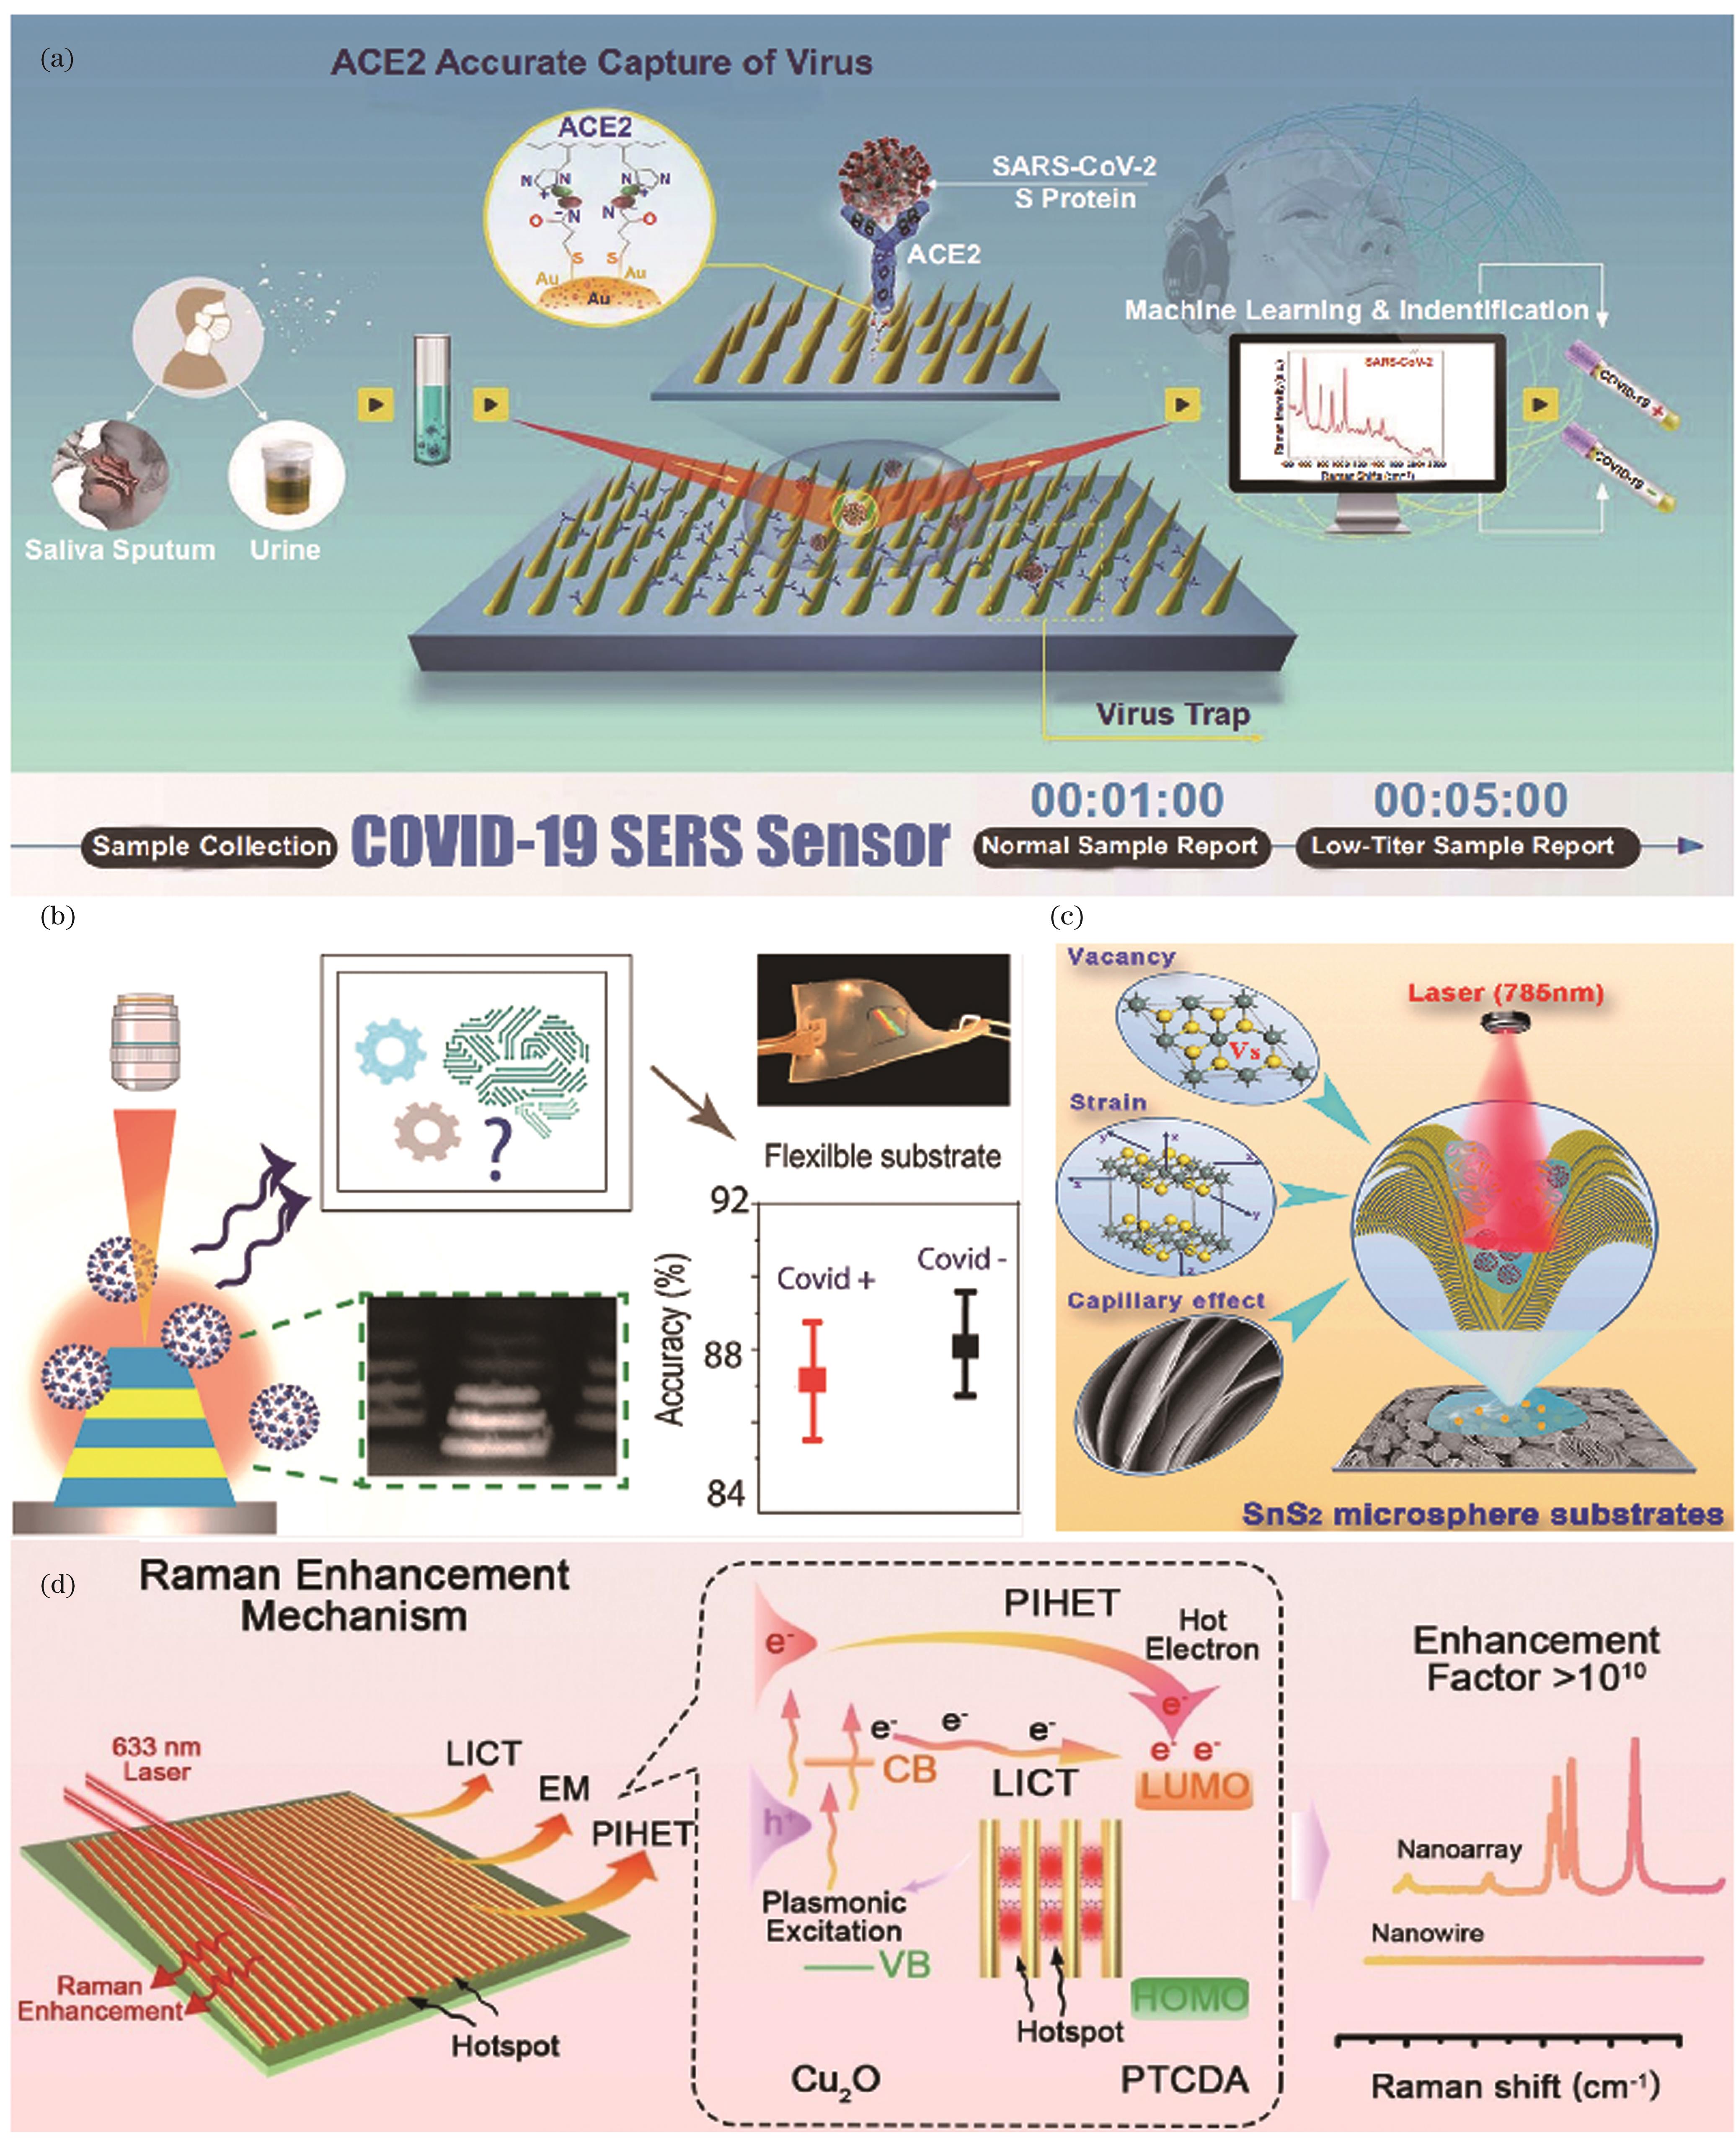 SERS sensors and platforms are designed in a variety of diverse ways for label-free detection of SARS-CoV-2. (a) Schematic diagram of the design and operation process of the COVID-19 SERS sensor[36]; (b) flexible substrate combined with SERS metal-insulator-metal nanostructures and machine learning-based label-free detection platform[42]; (c) schematic diagram of SnS2 microsphere substrates design[44]; (d) Raman enhancement mechanism of Cu2O nanoarray with significant enhancement factor[45]